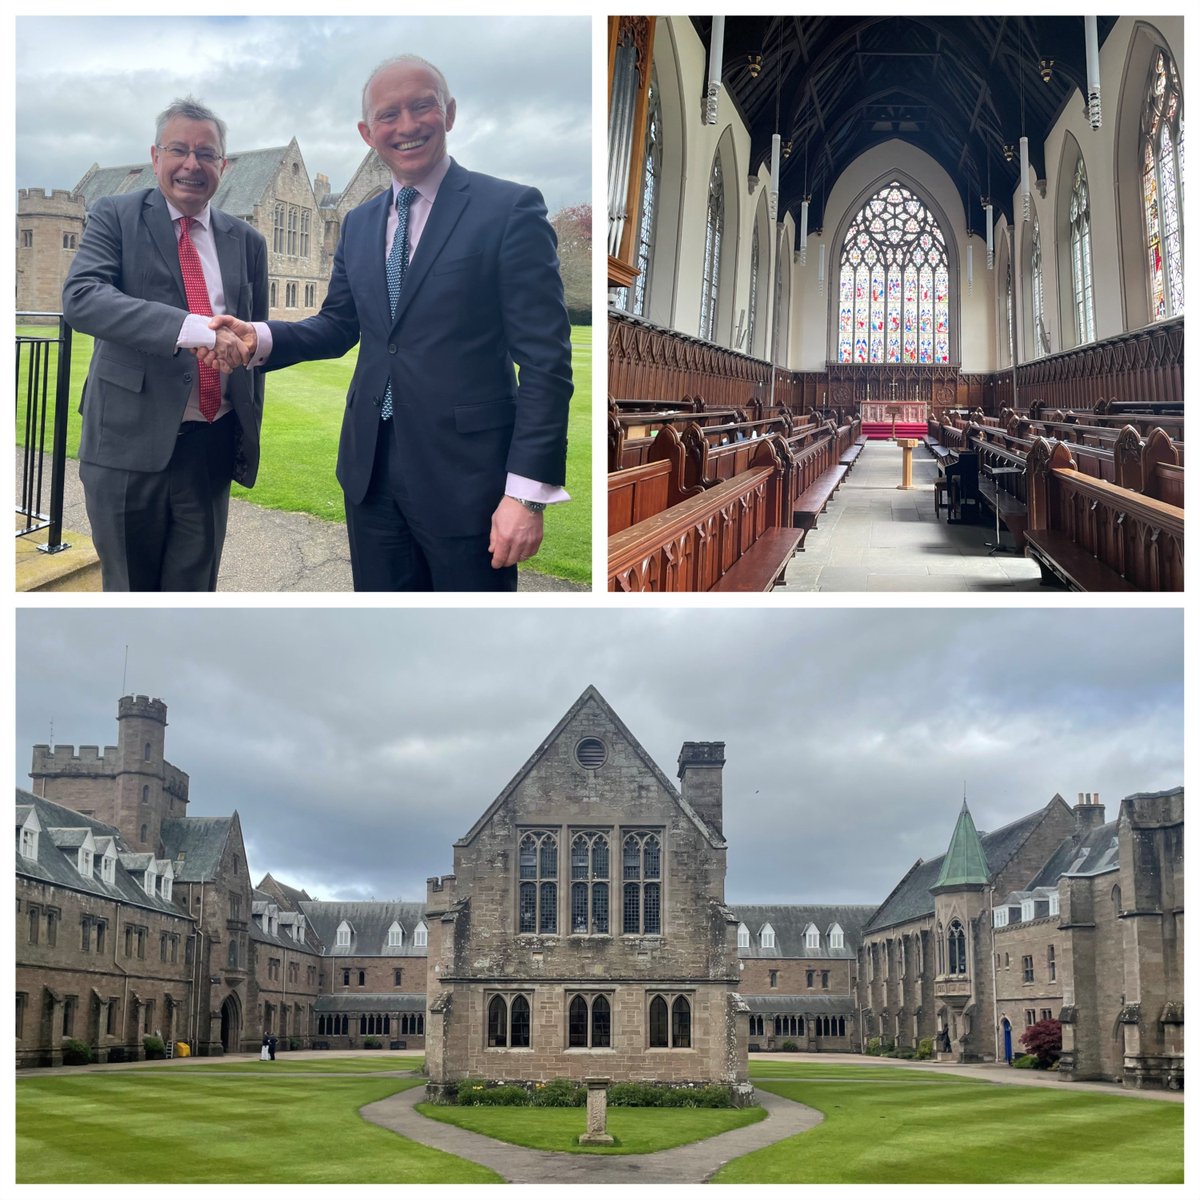 A scenic drive found the @HMC_Org General Secretary with @markd_mortimer at Glenalmond College @GlenalmondColl. This architectural gem brought back happy memories of #Hogmanay when Dr Hyde visited with friends as a student.